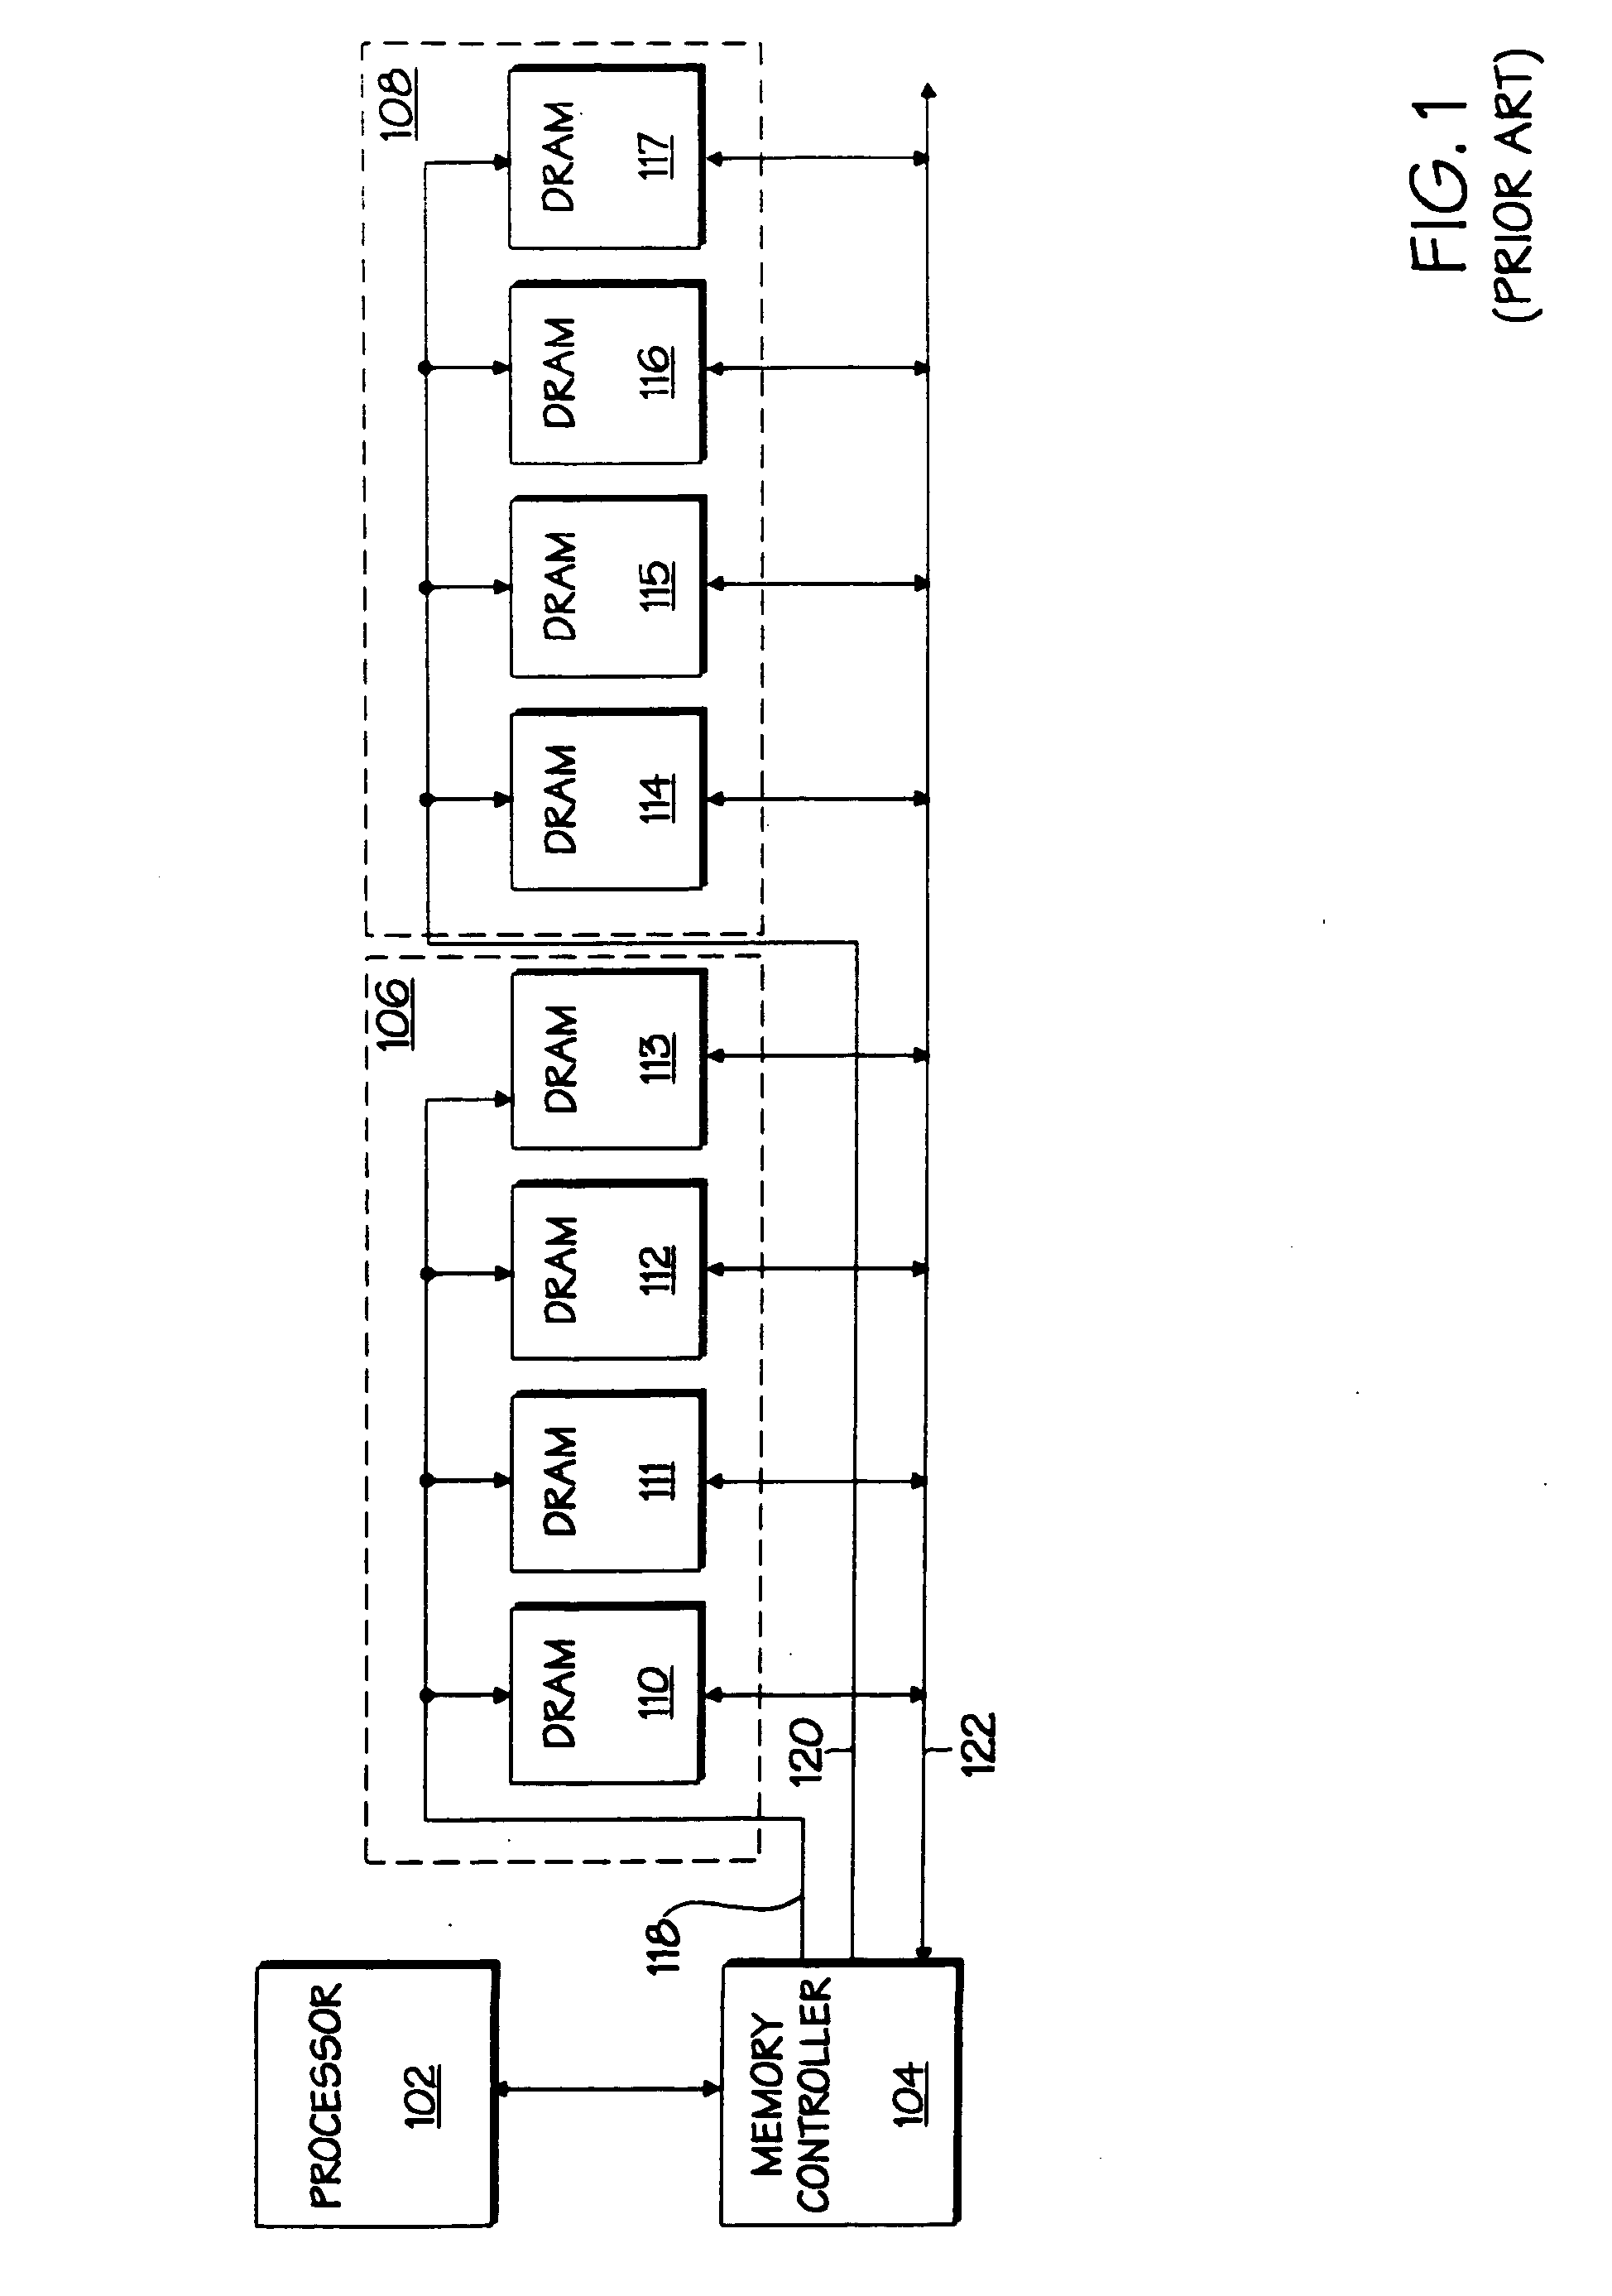 Memory system including a memory module having a memory module controller